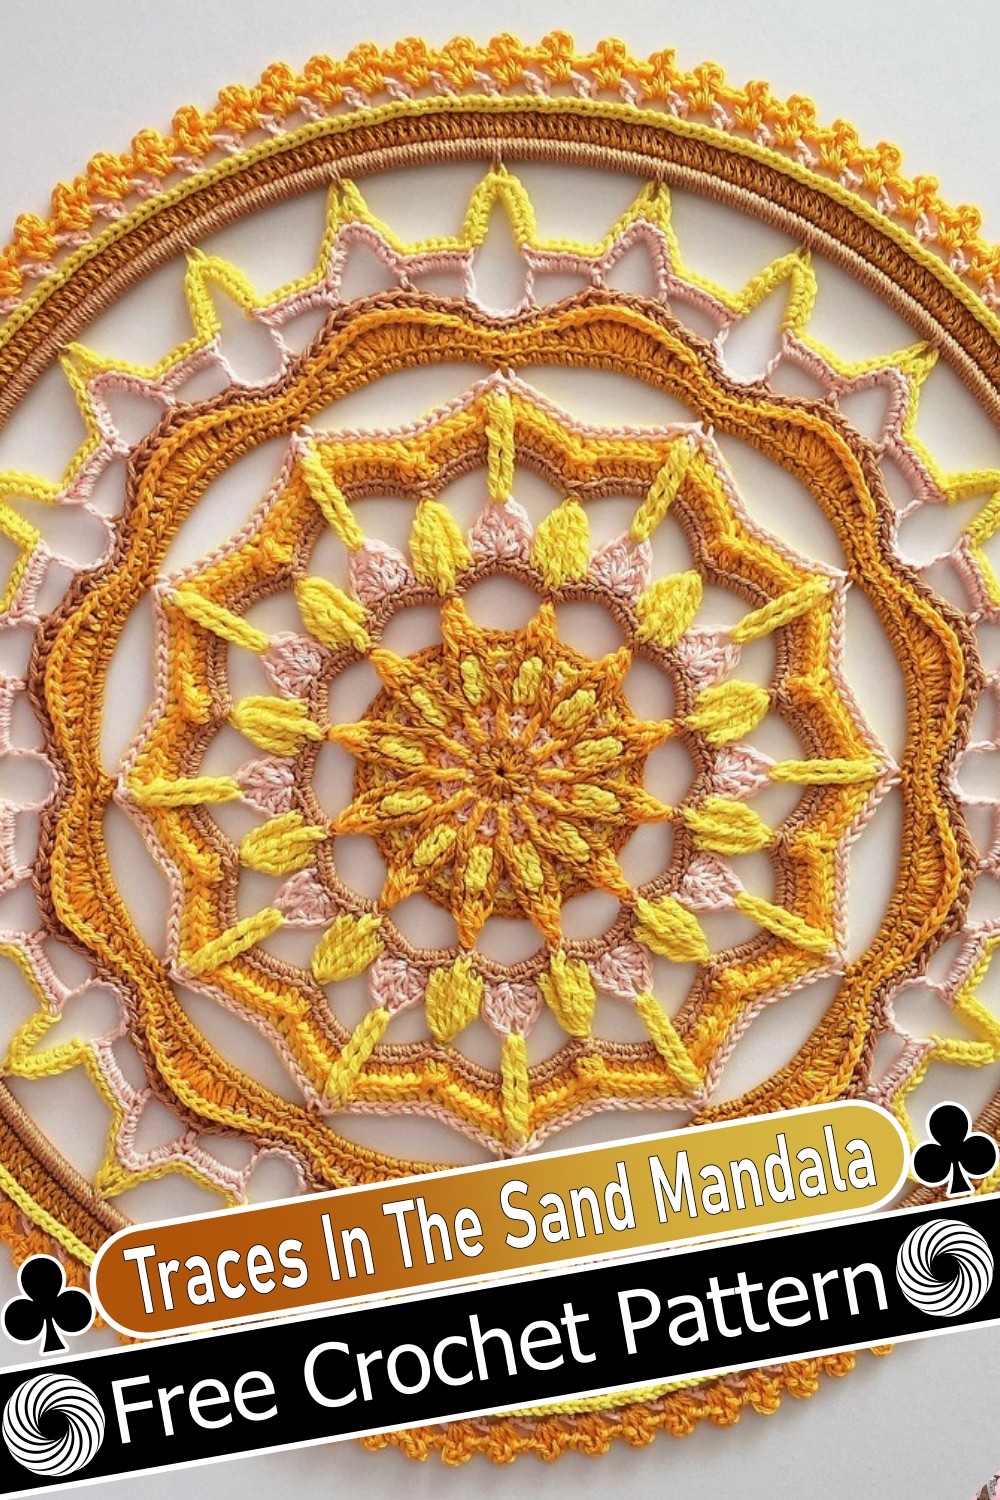 Traces In The Sand Mandala